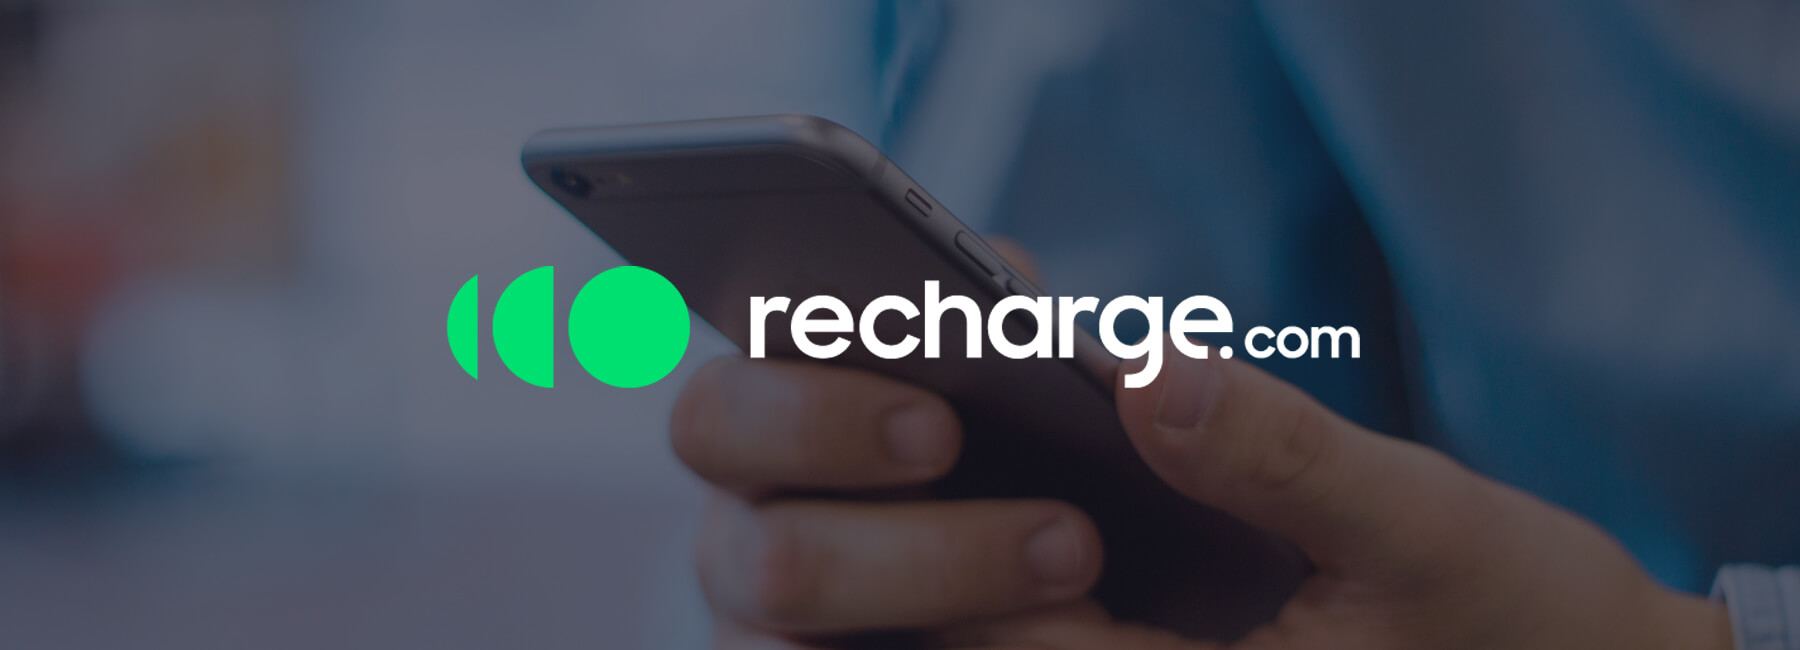 Recharge.com partners up with Mopinion